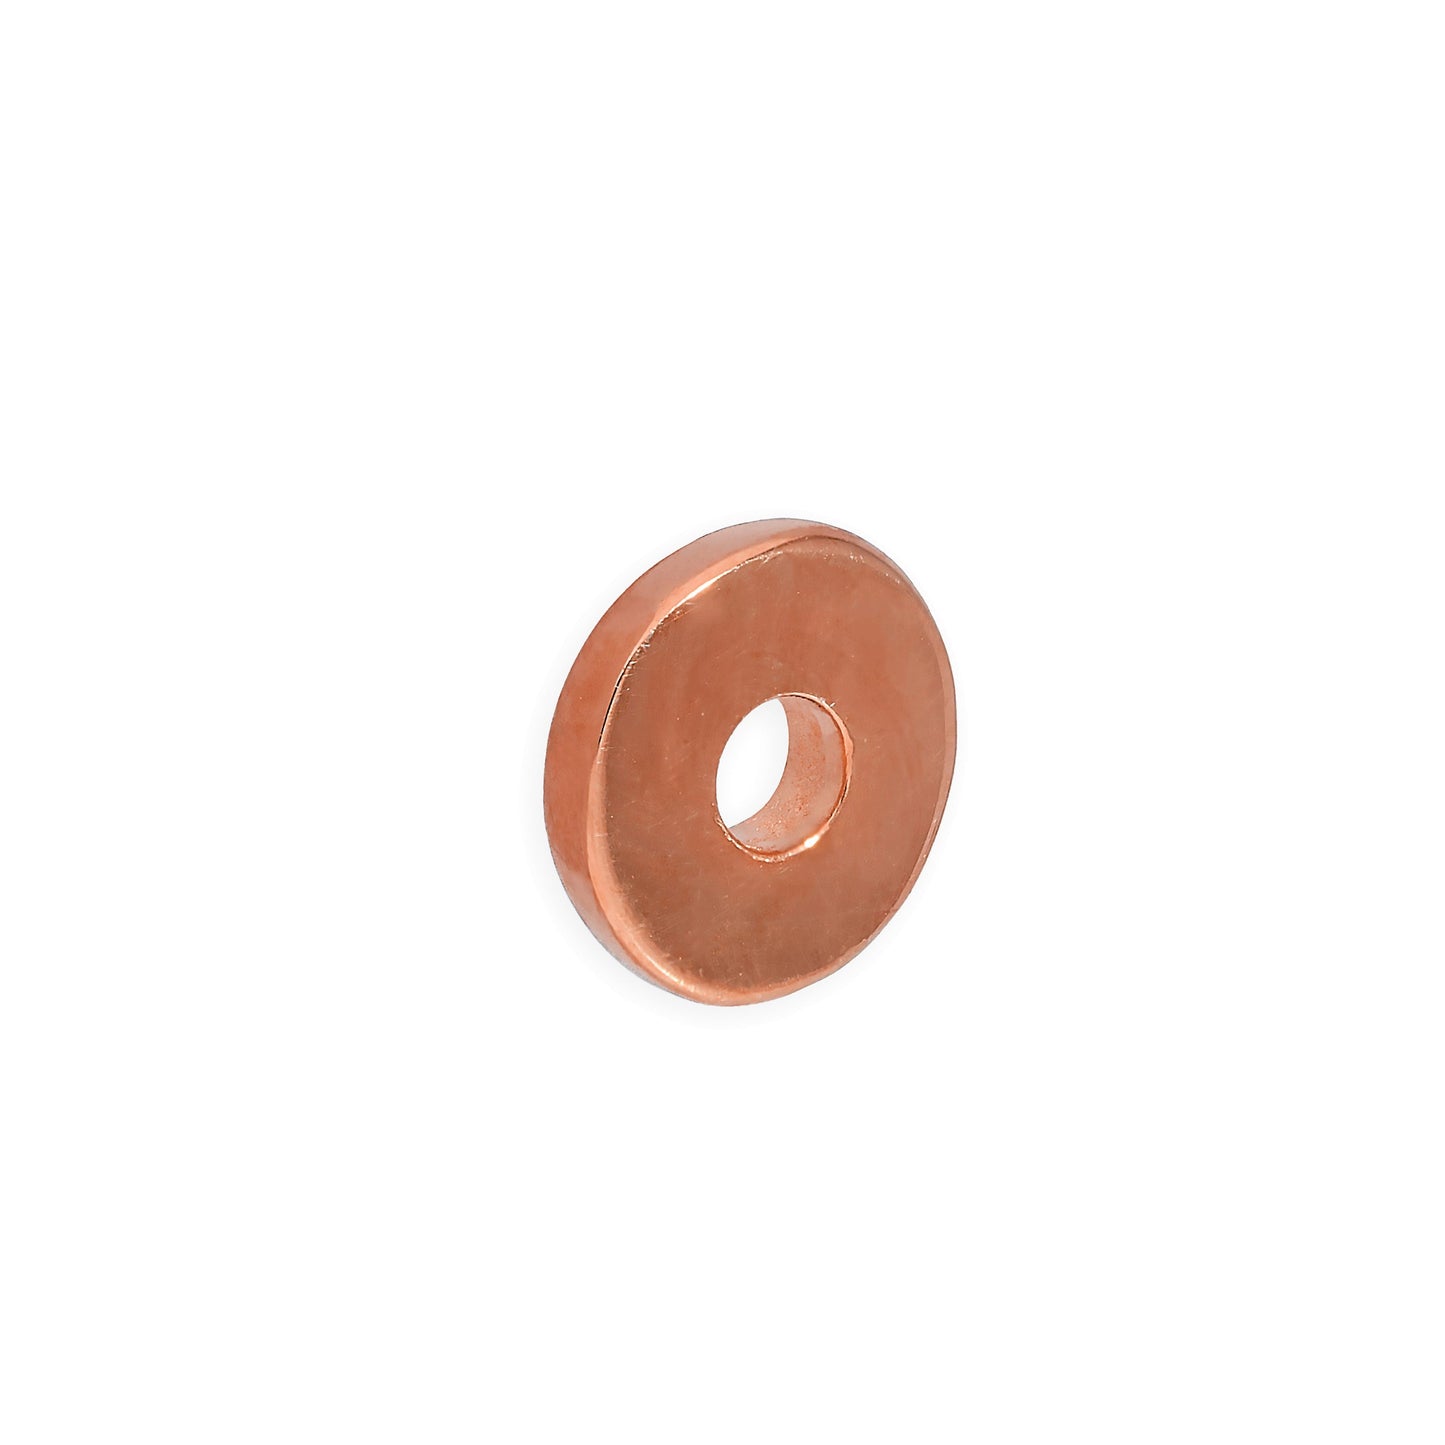 Rose Gold Plated Sterling Silver 1mm Plain Polished Round Flat Disc Ring Bead